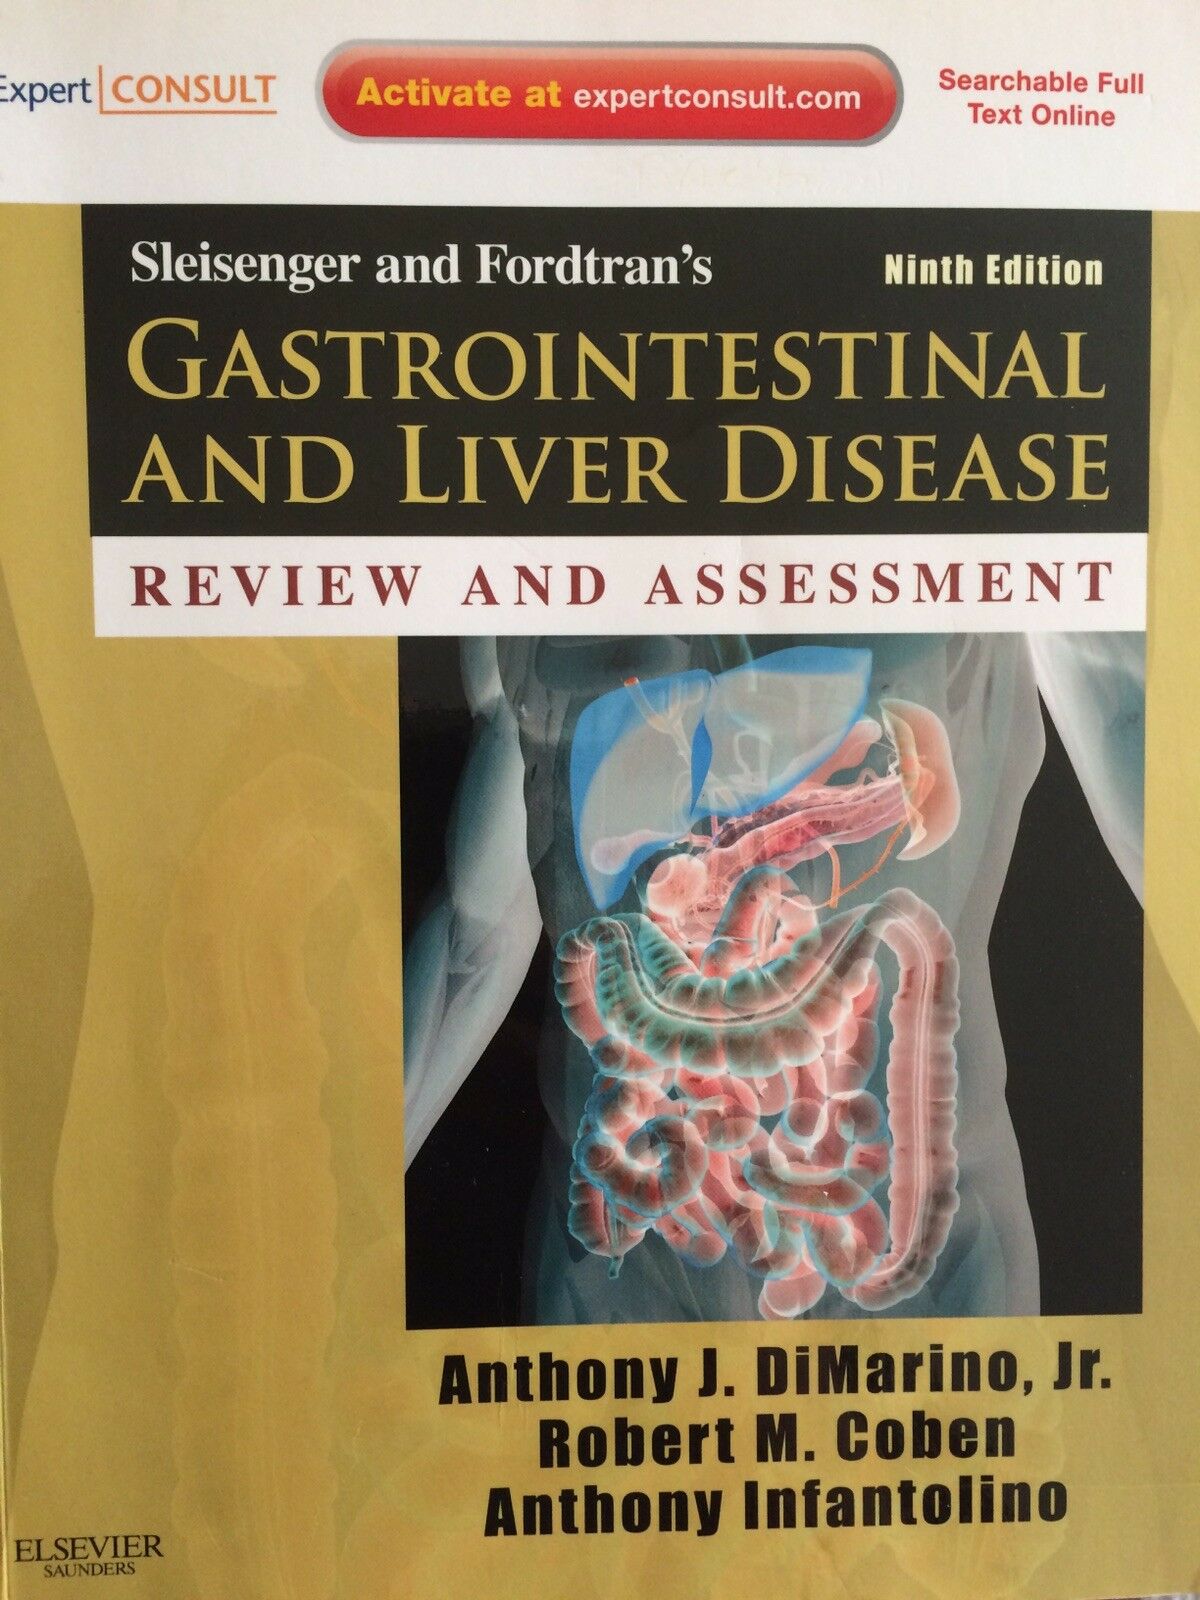 Gastrointestinal And Liver Disease Review And Assessment Sleisenger Fordtran's